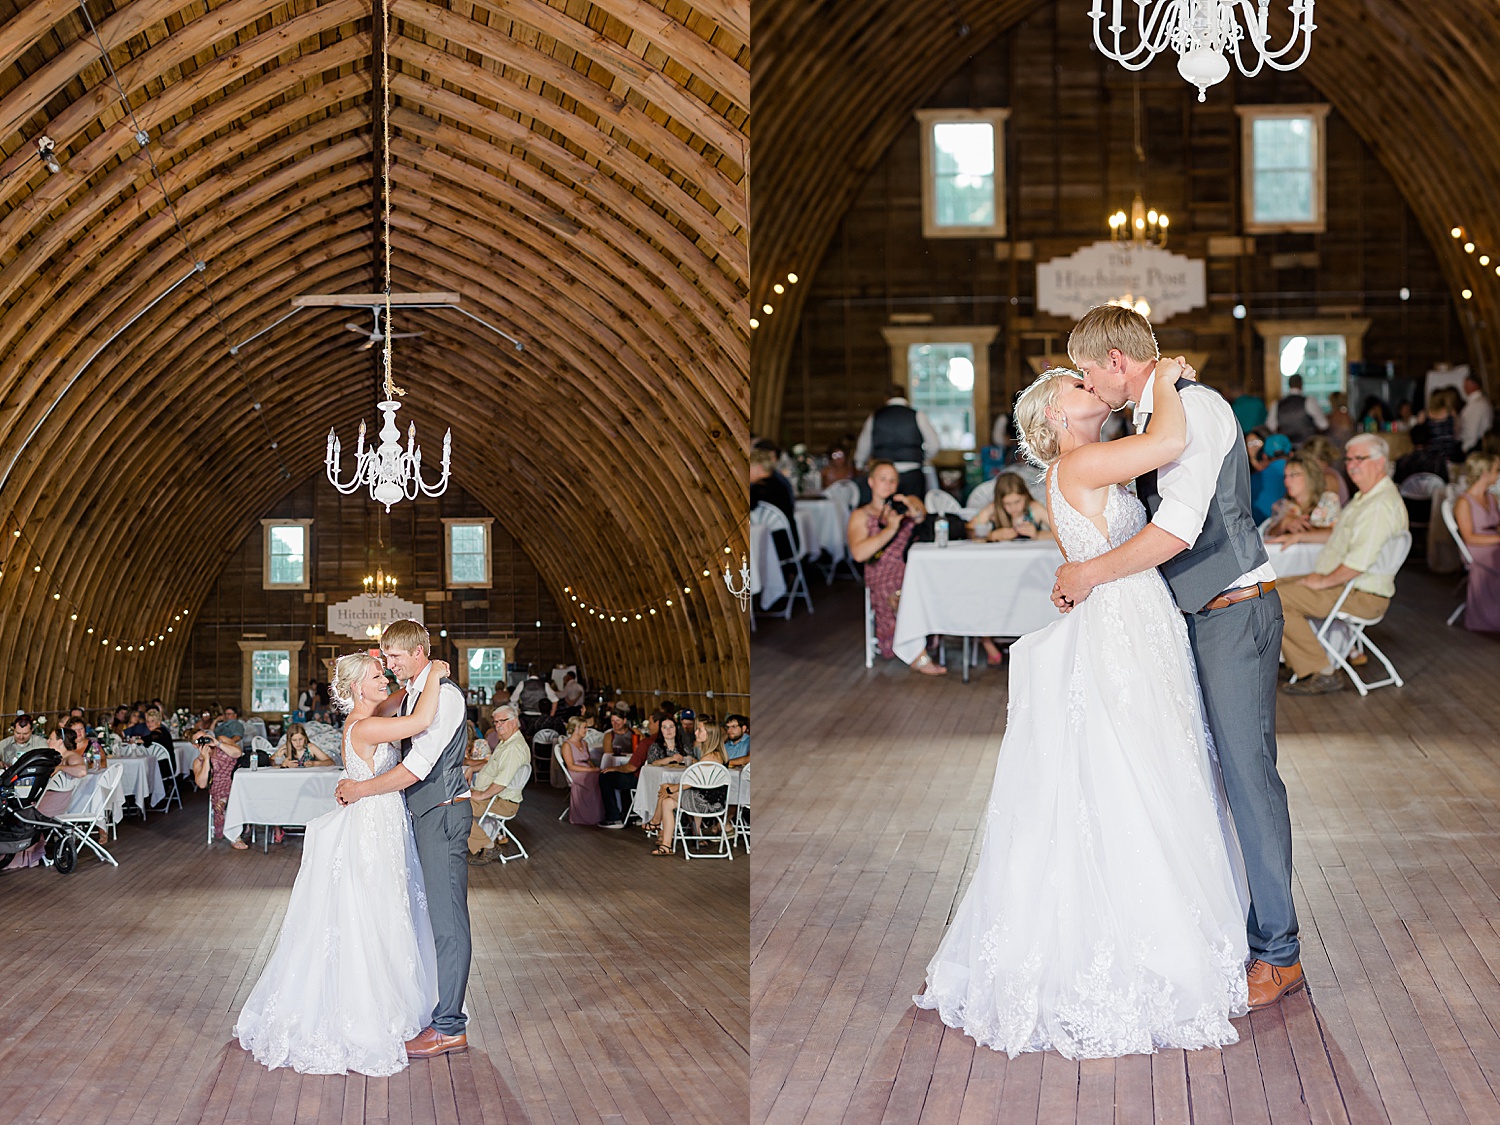 Newlyweds share first dance under the wooden ceiling at Hitching Post Minnesota Wedding